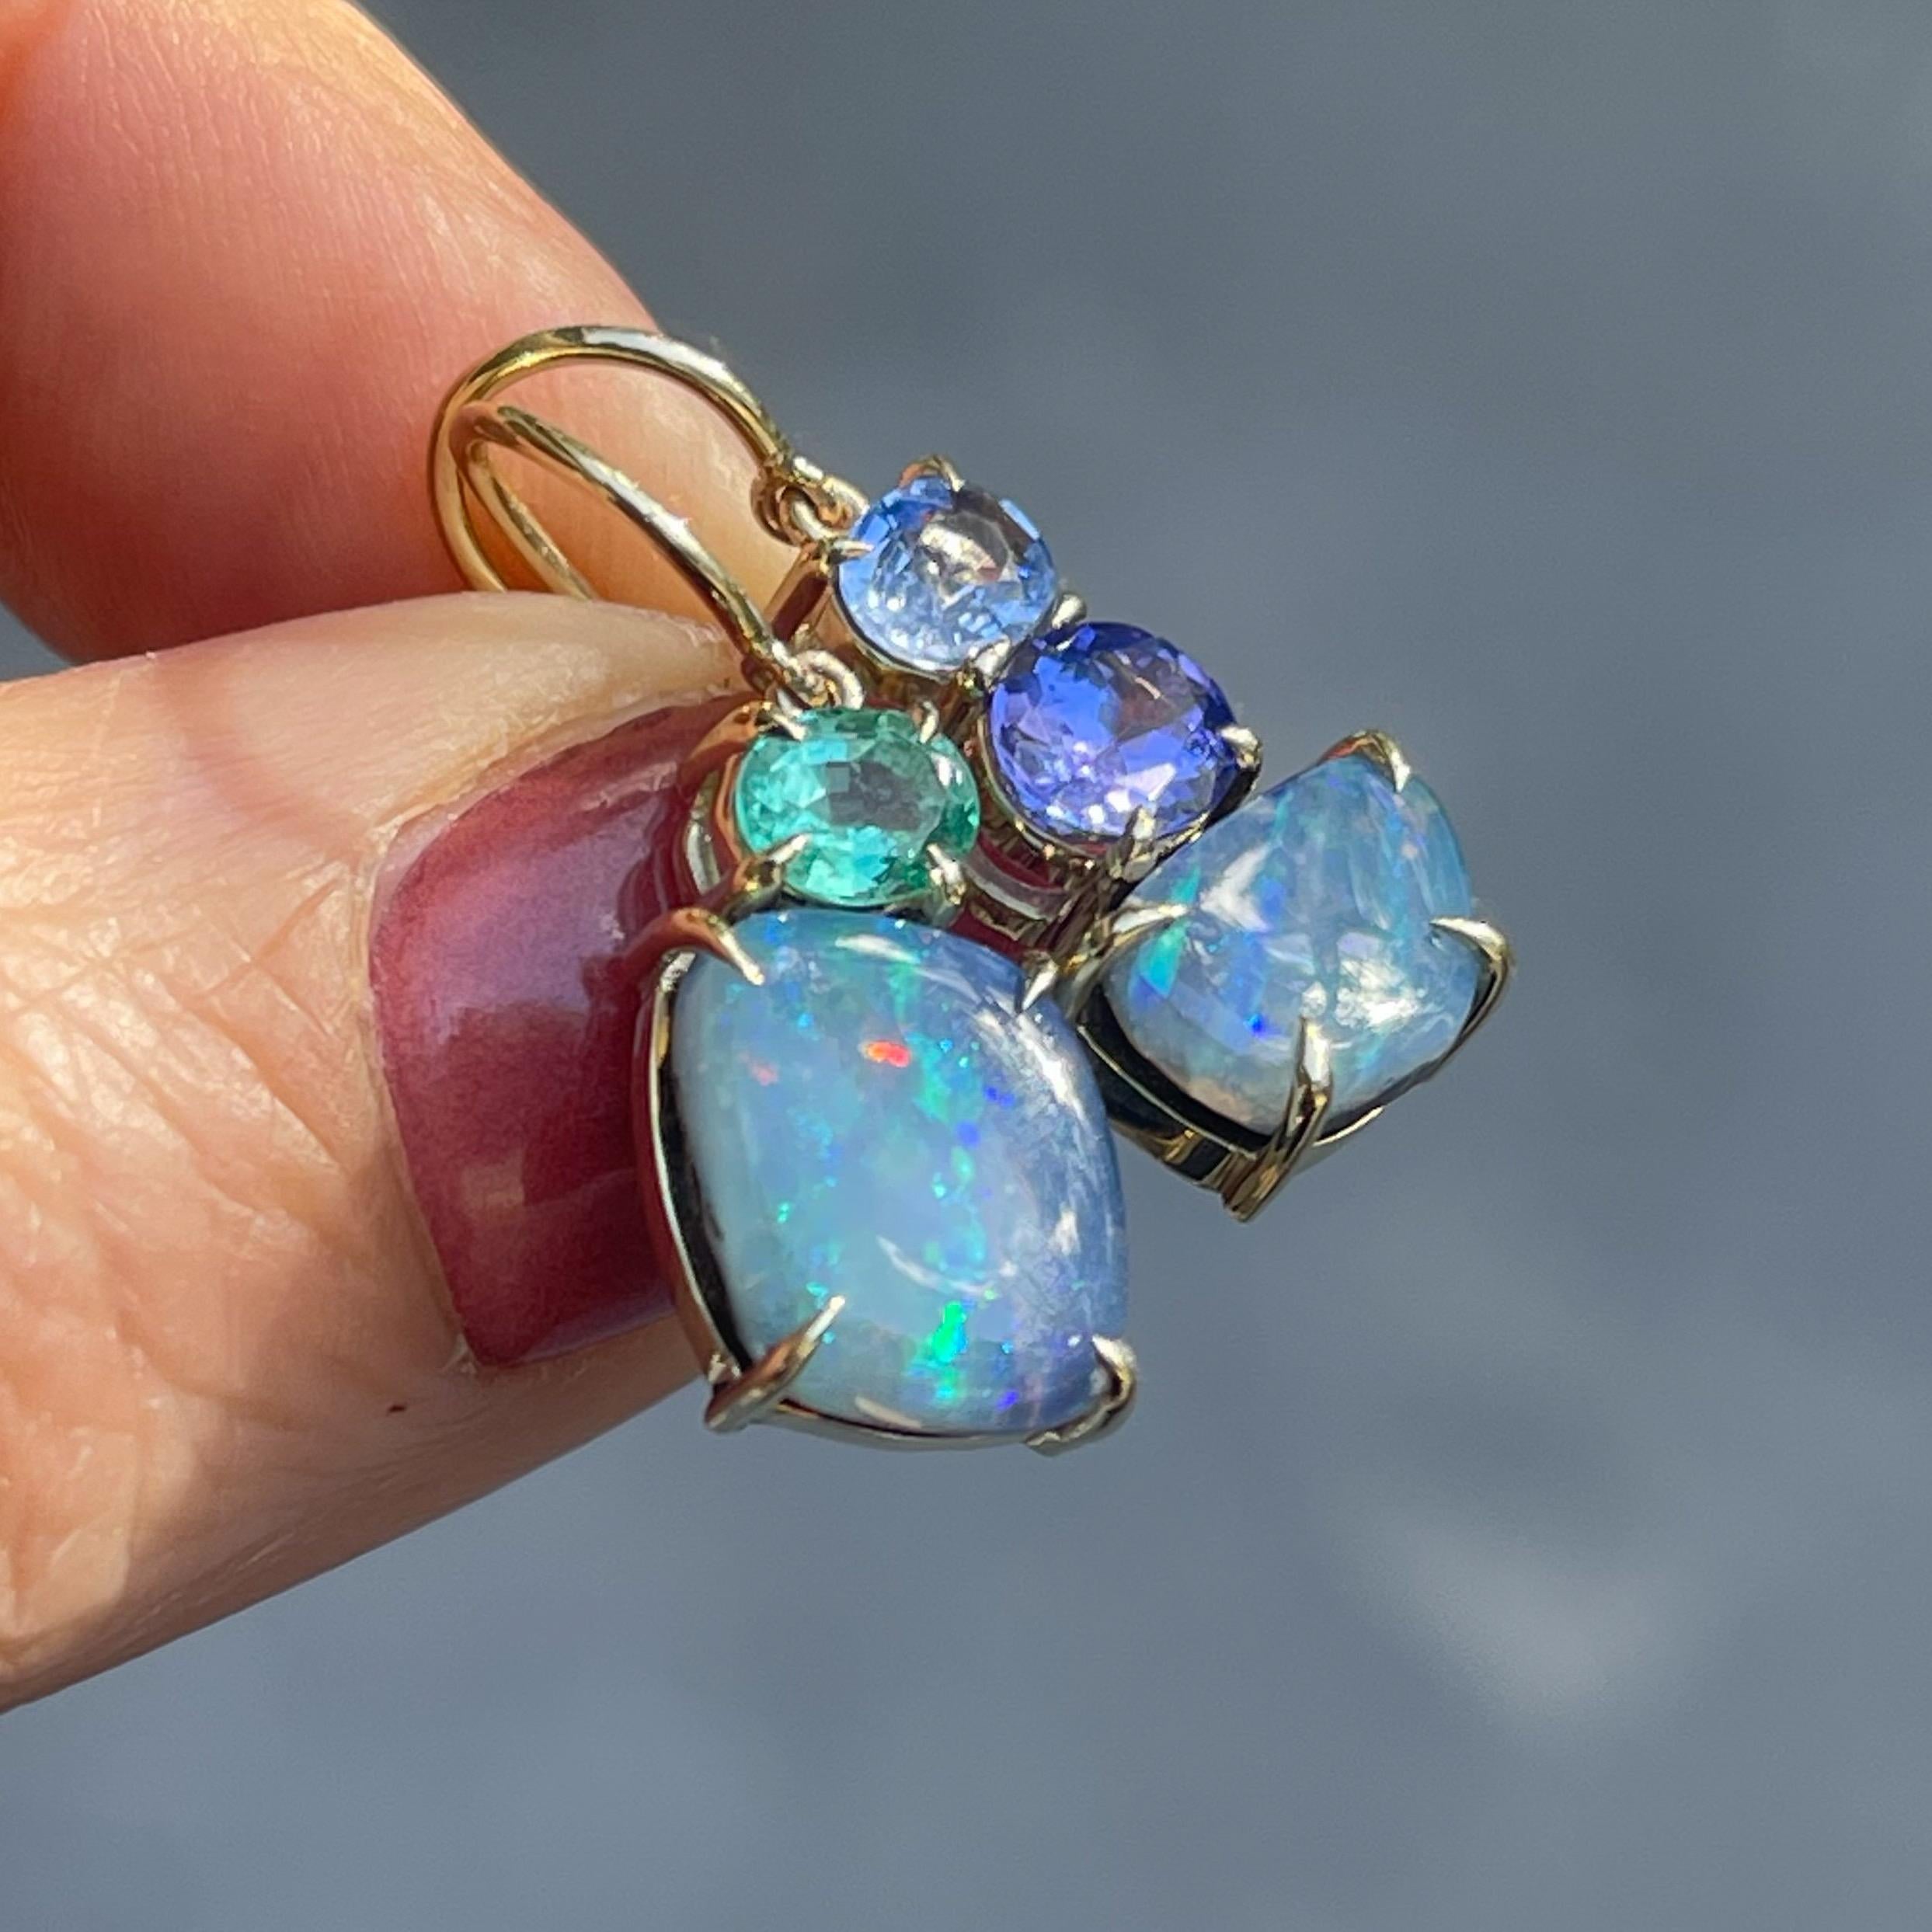 A sanctuary of beauty enchants in these Australian Opal Earrings. Boulder Opal oases are paired with the ultimate gems - tanzanite, sapphire, and emerald - to create an idyllic visual haven. Equal parts exotic and elegant, the opal expanses